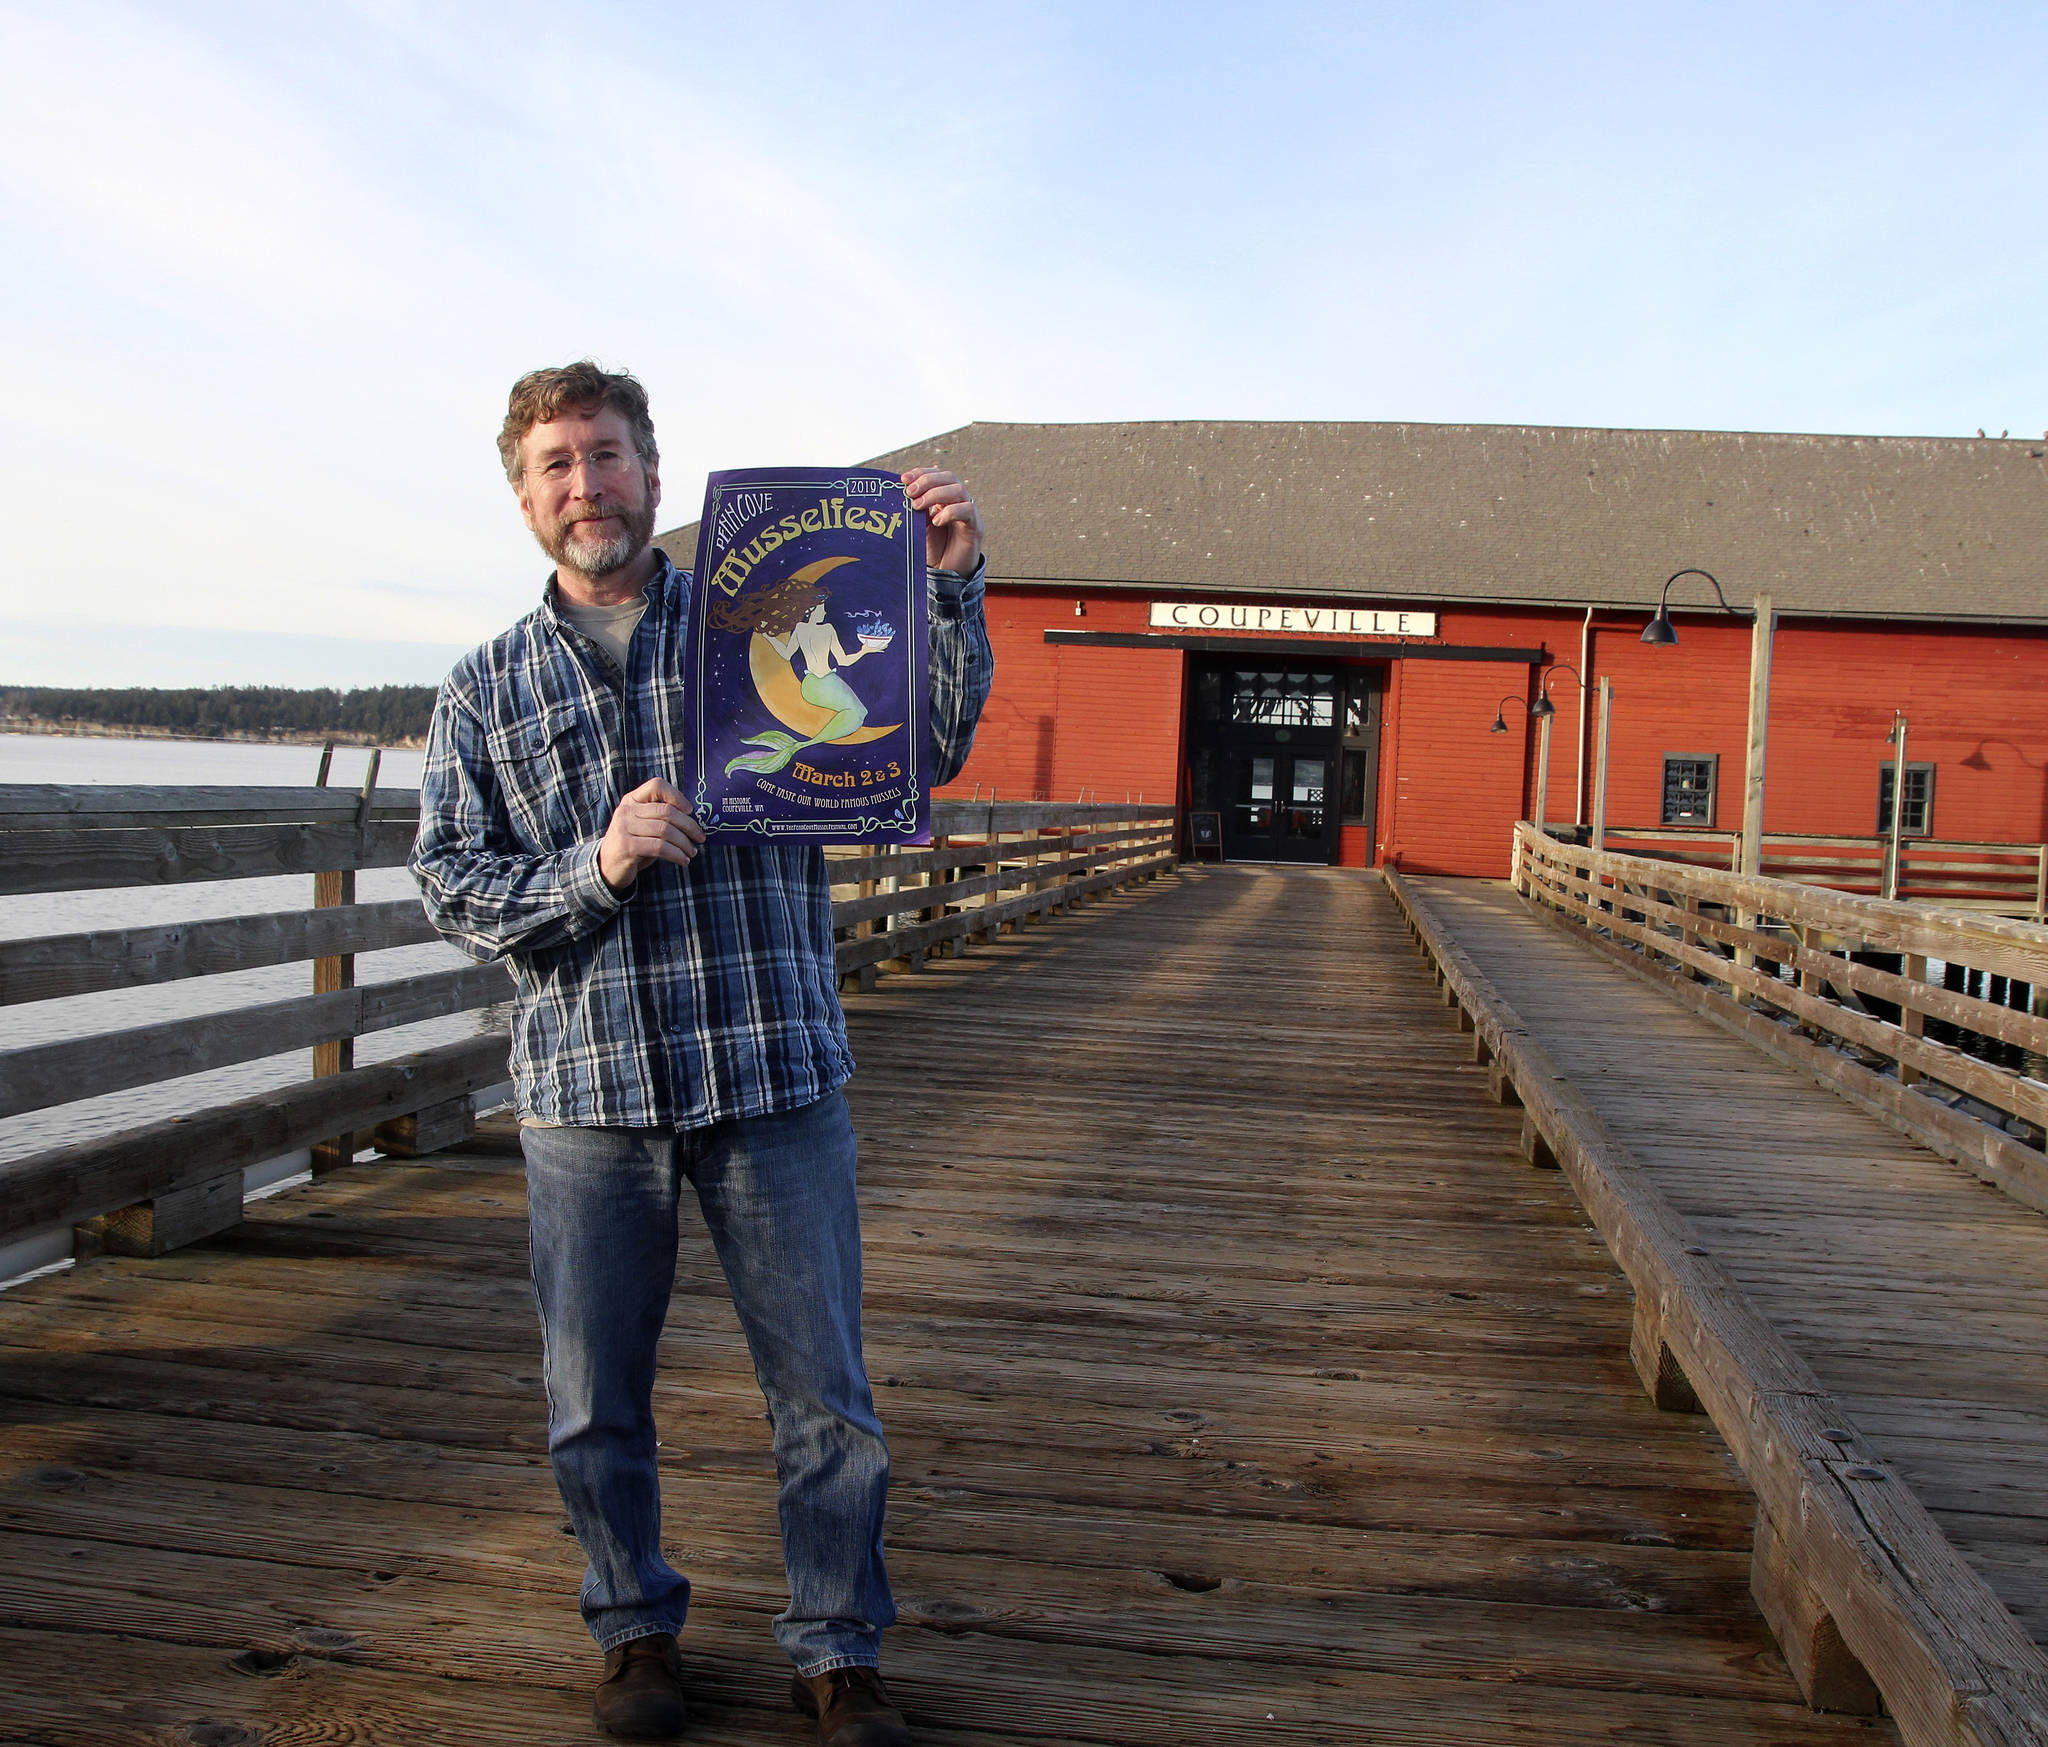 Scott Rosenkranz holds up his design for the 2019 Musselfest poster. The festival will be held March 2-3 in Coupeville. (Photo by Maria Matson/Whidbey News-Times)